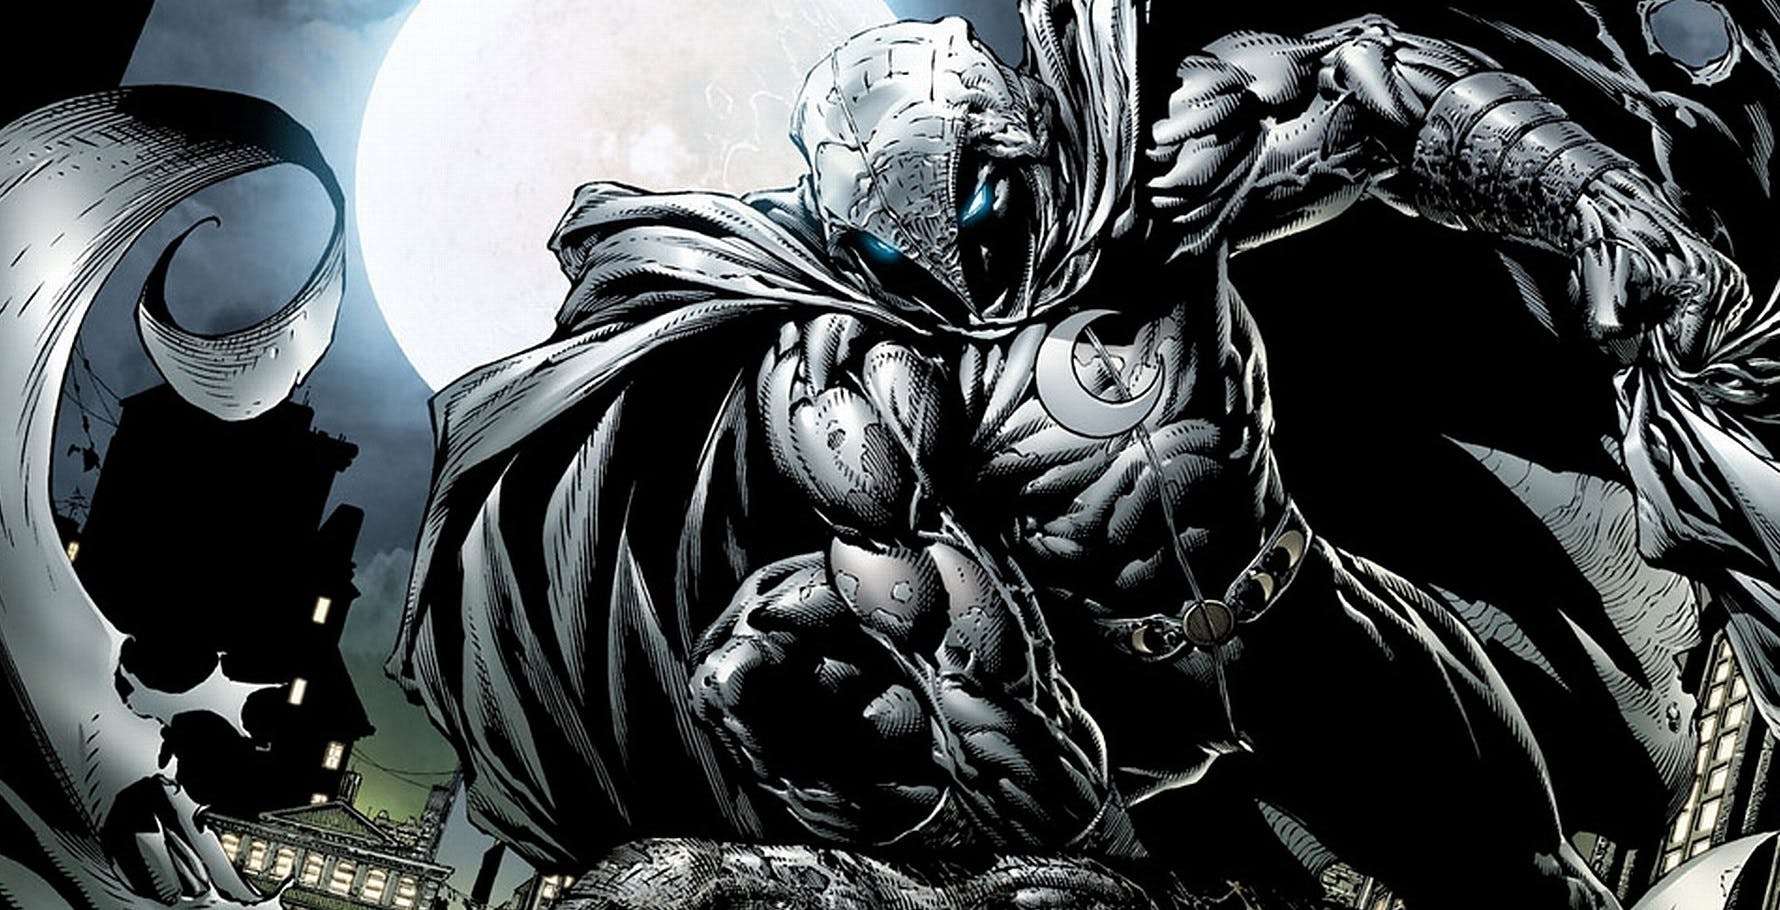 Moon Knight’s Chronic Dissociative Identity Disorder Shaped Most of His Character Arc